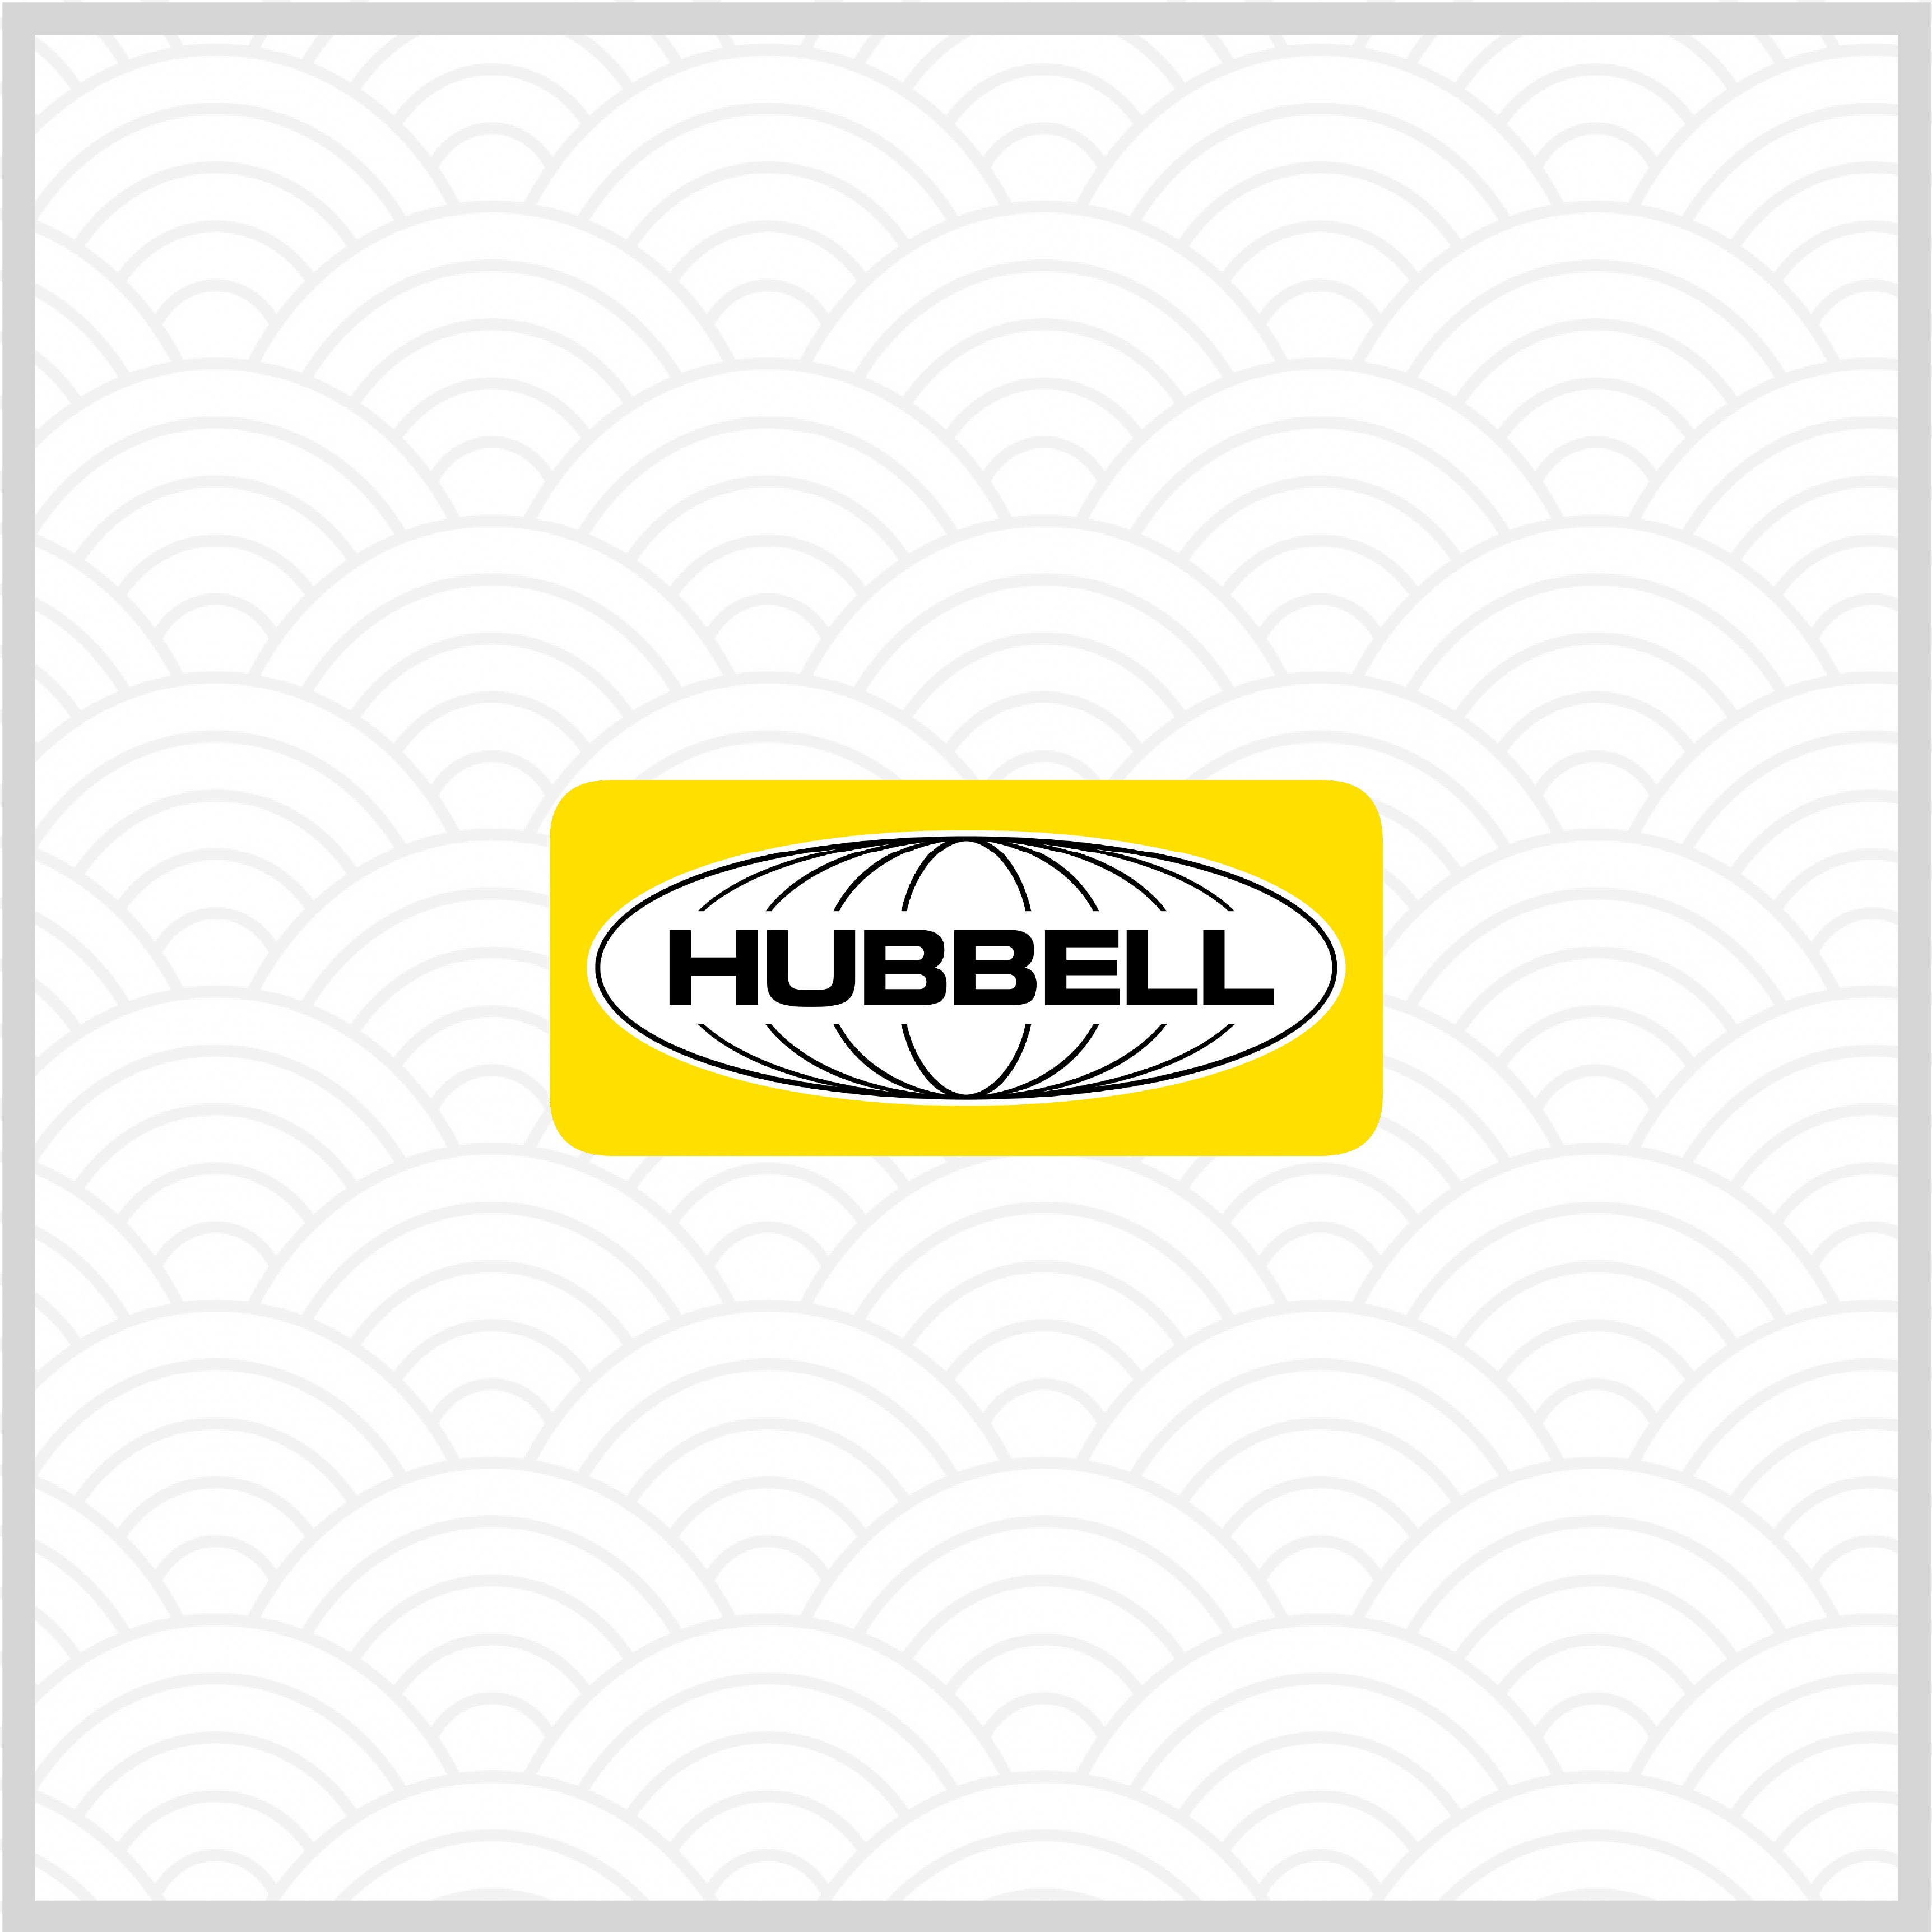 Protected: Hubbell